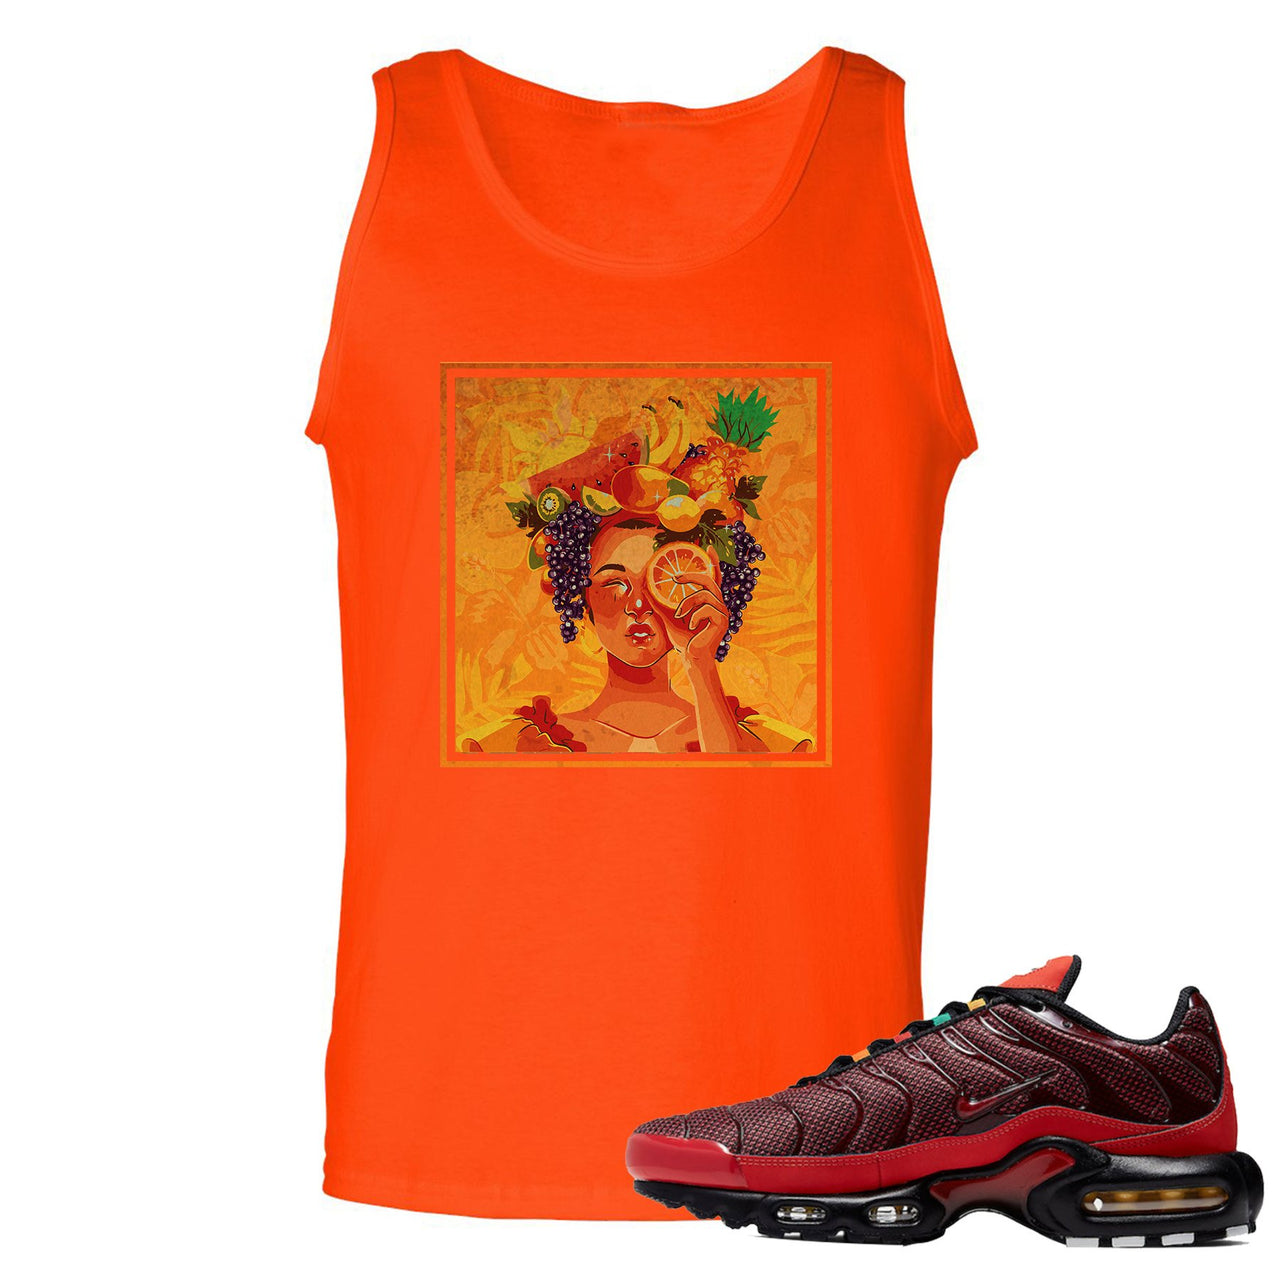 printed on the front of the air max plus sunburst sneaker matching orange tank top is the lady fruit logo